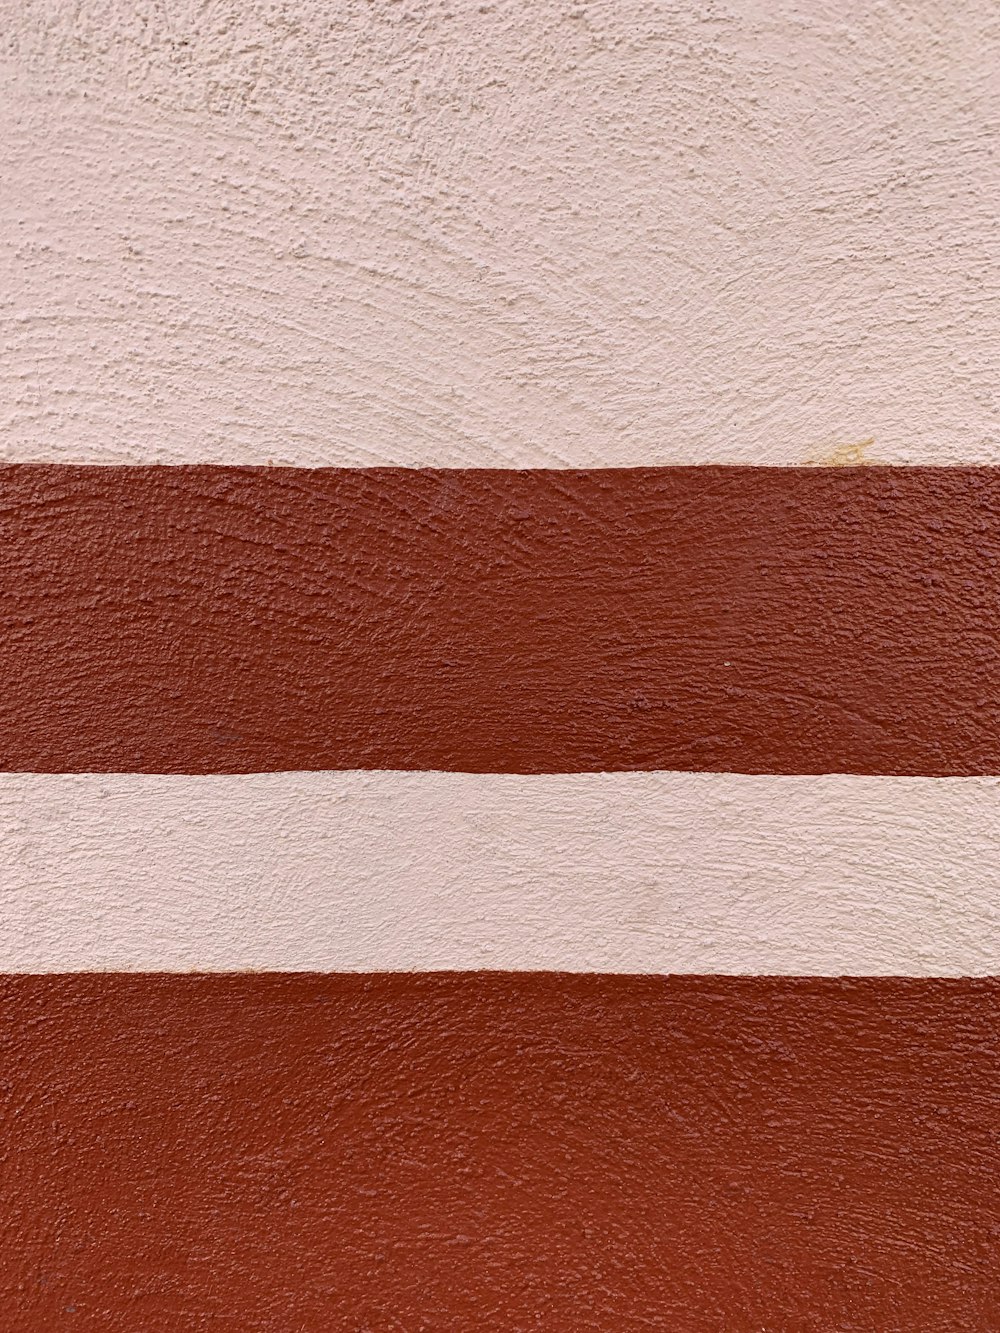 a close up of a red and white stripe on a wall